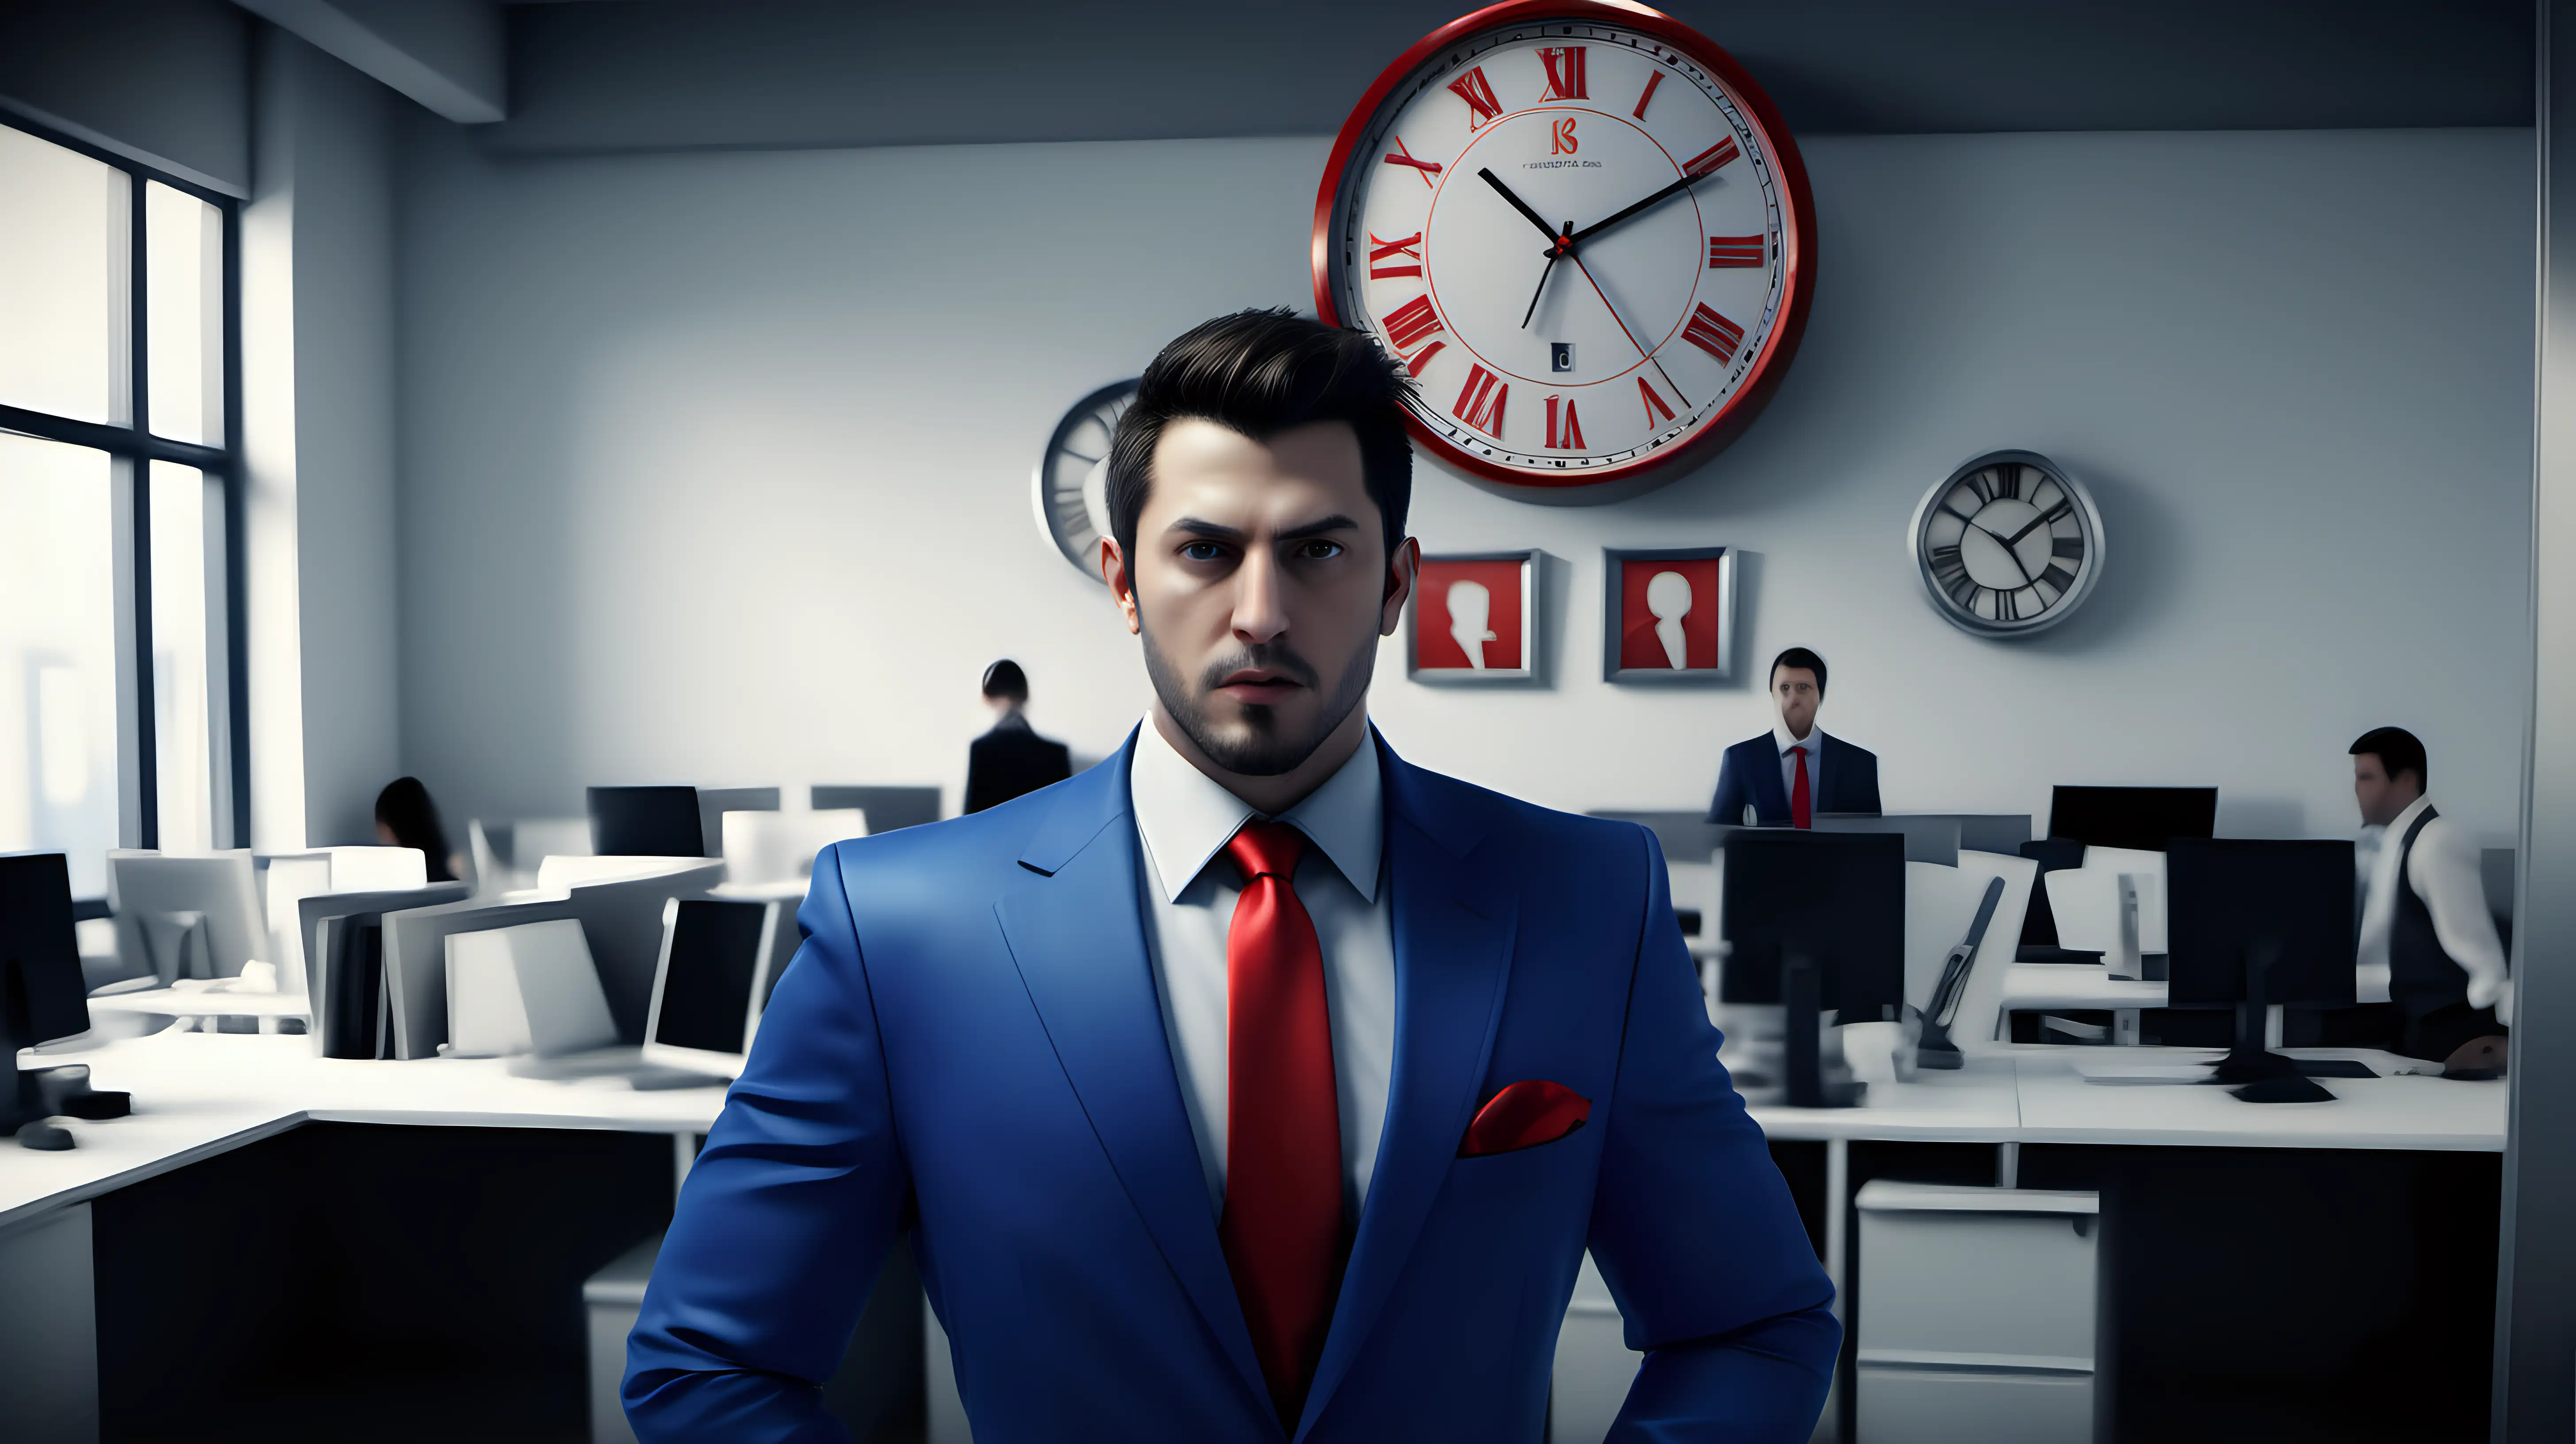 Corporate Leader in Time Crunch Businessman Amidst Office Chaos